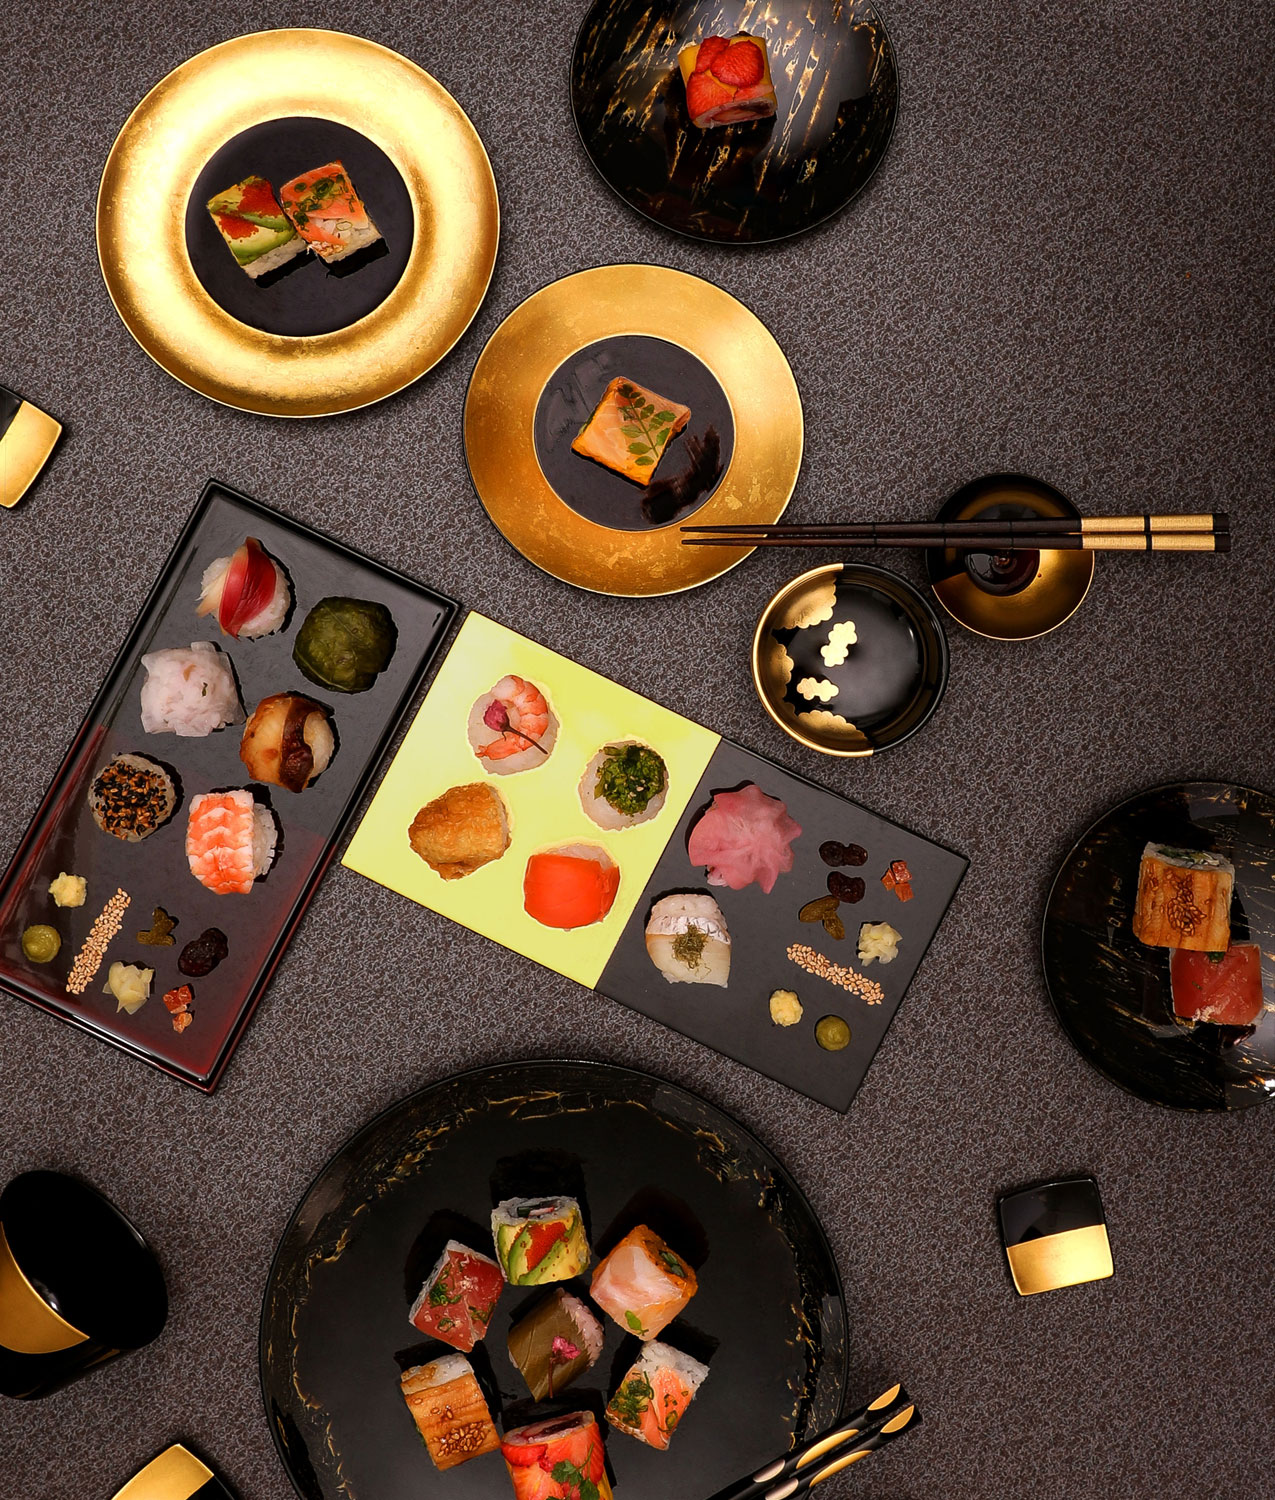 Lacquerware Matches Sushi | YAMADA HEIANDO Lacquerware: Hand-Crafted Imperial Luxury for Japanese Emperor